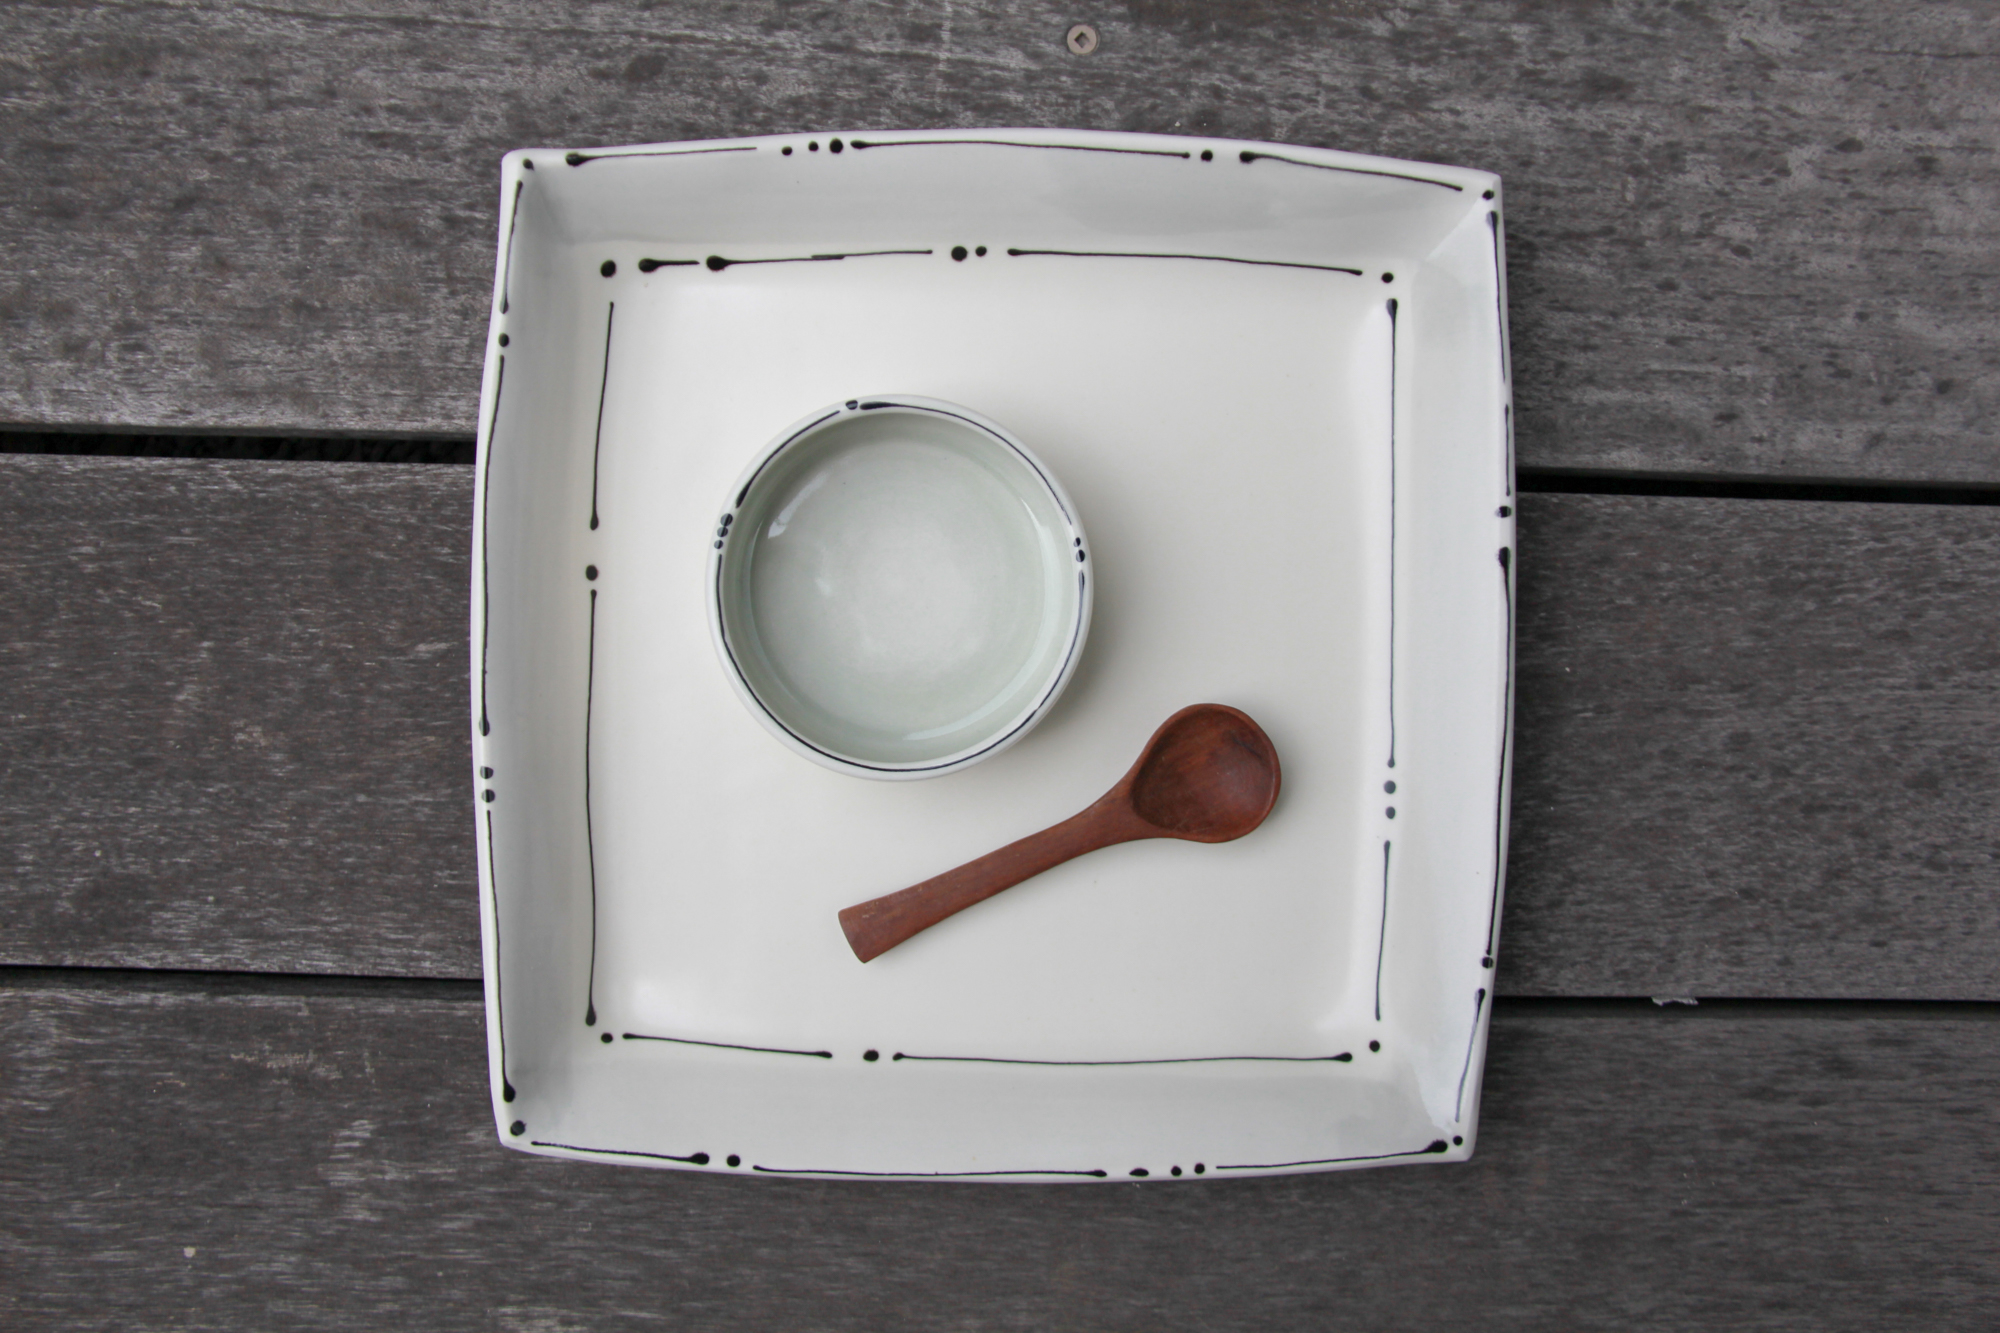 Iris Dorton: Medium Tray with Circle Dot Line Motif, comes with Wood Spoon and Dish Product Image 5 of 11